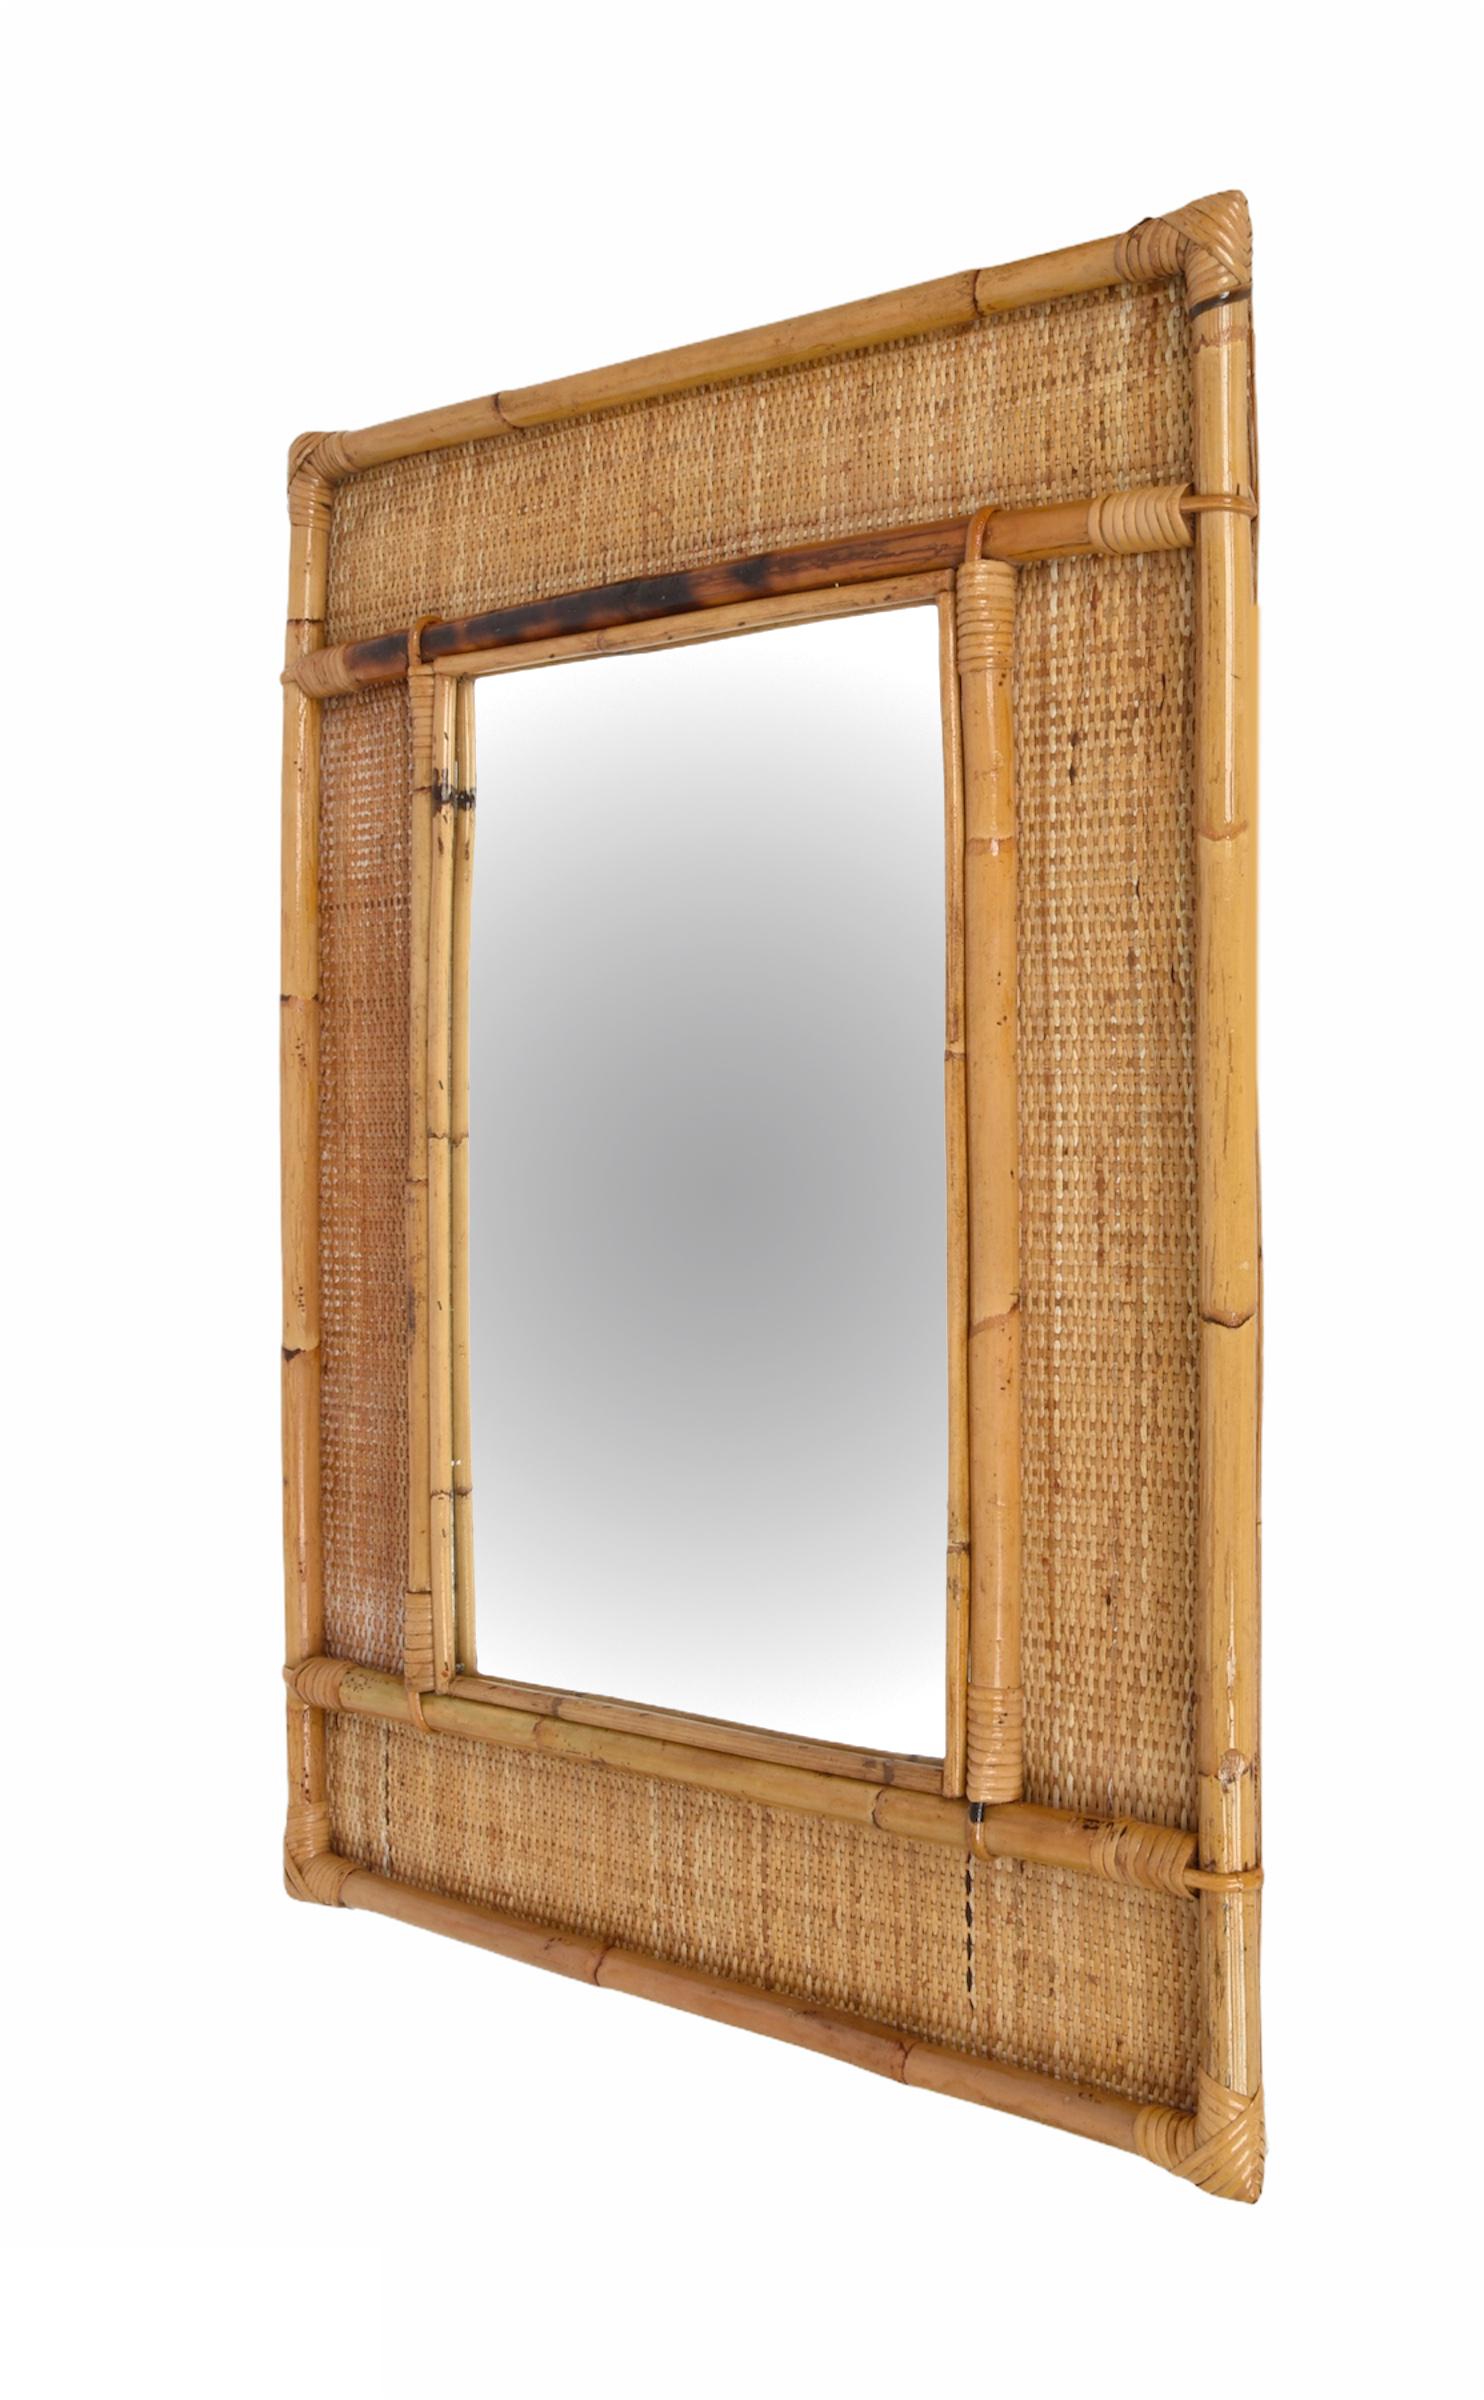 Midcentury Rectangular Italian Mirror with Bamboo and Woven Wicker Frame, 1970s 7